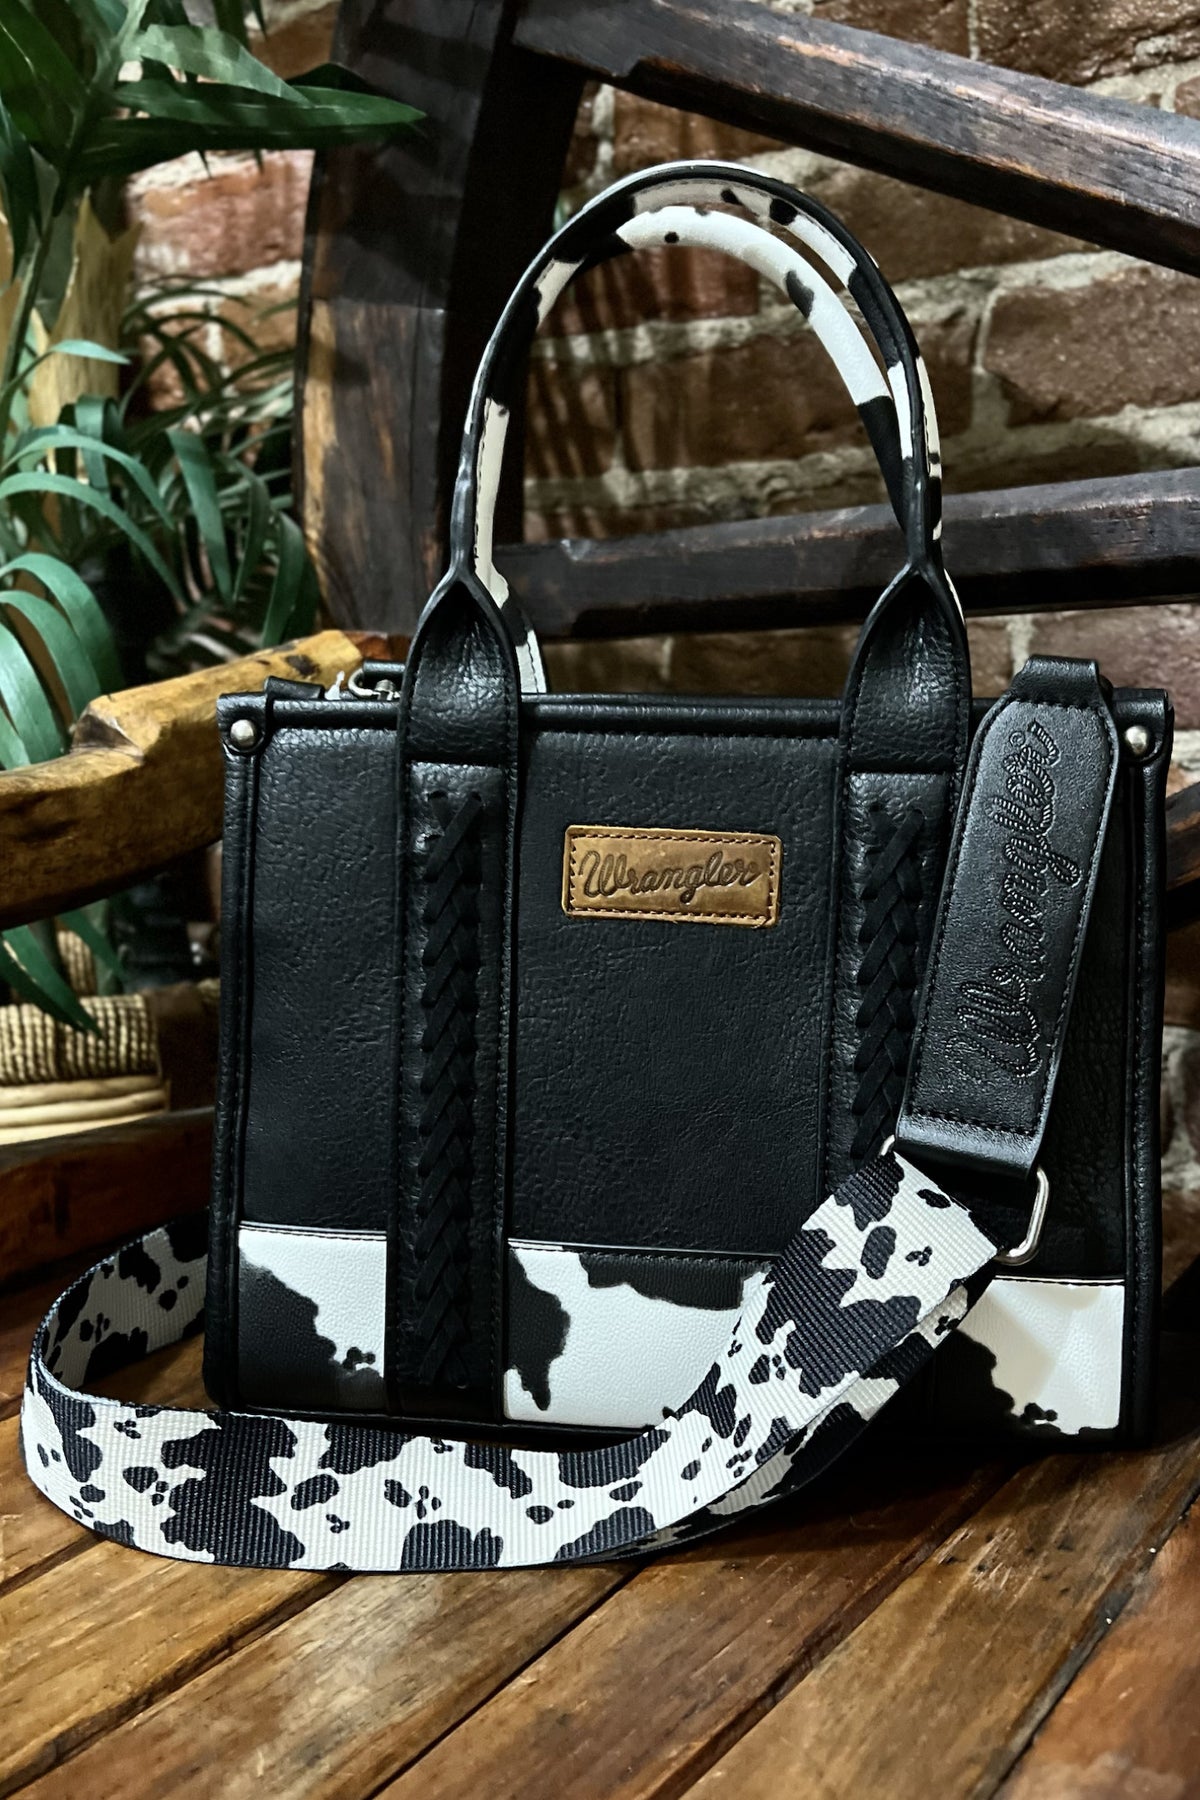 Wrangler Black Cow Print Concealed Carry Crossbody Tote-Handbags & Accessories-Montana West-Gallop 'n Glitz- Women's Western Wear Boutique, Located in Grants Pass, Oregon